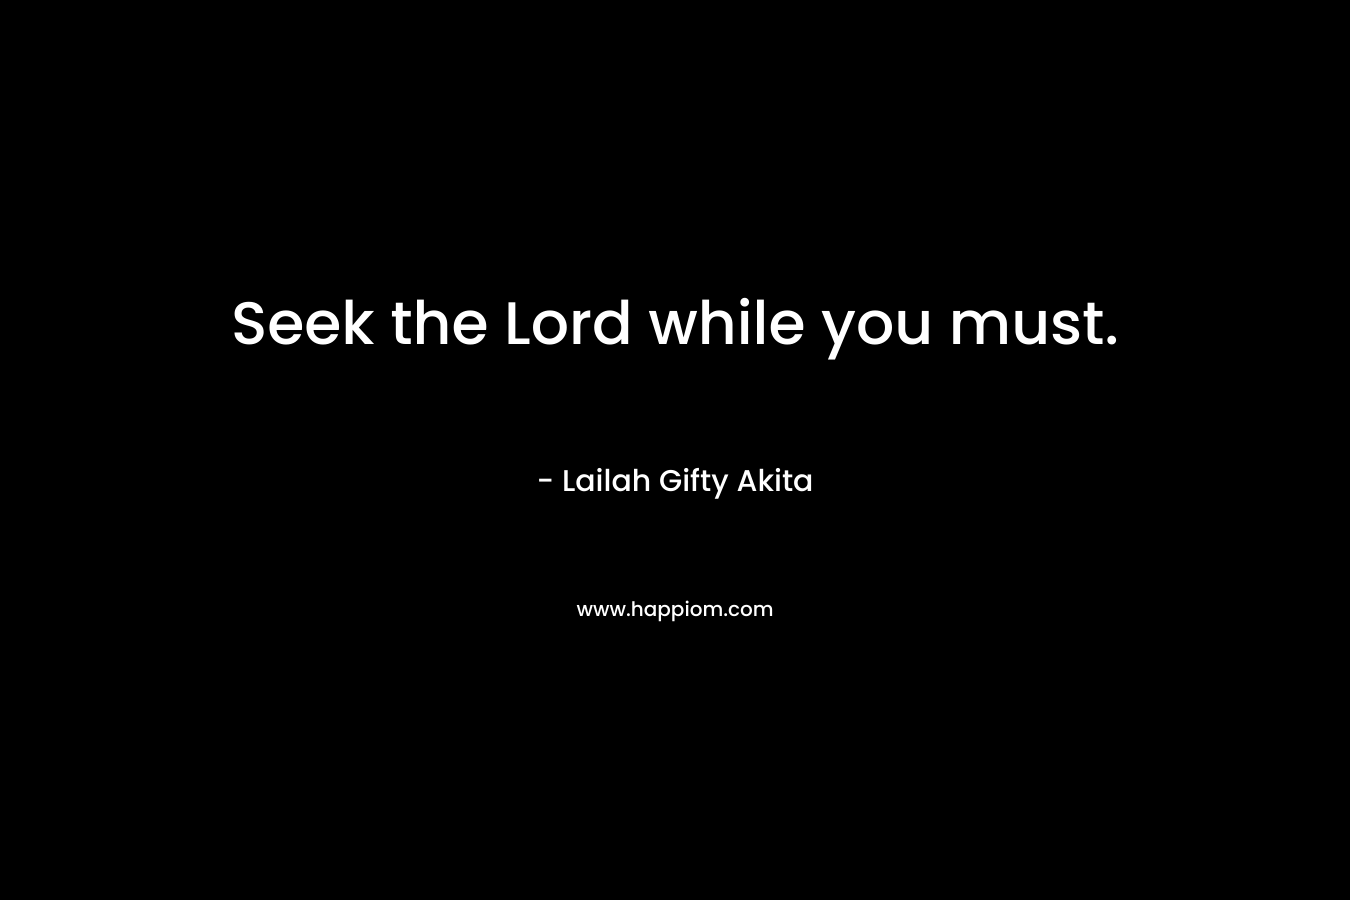 Seek the Lord while you must.